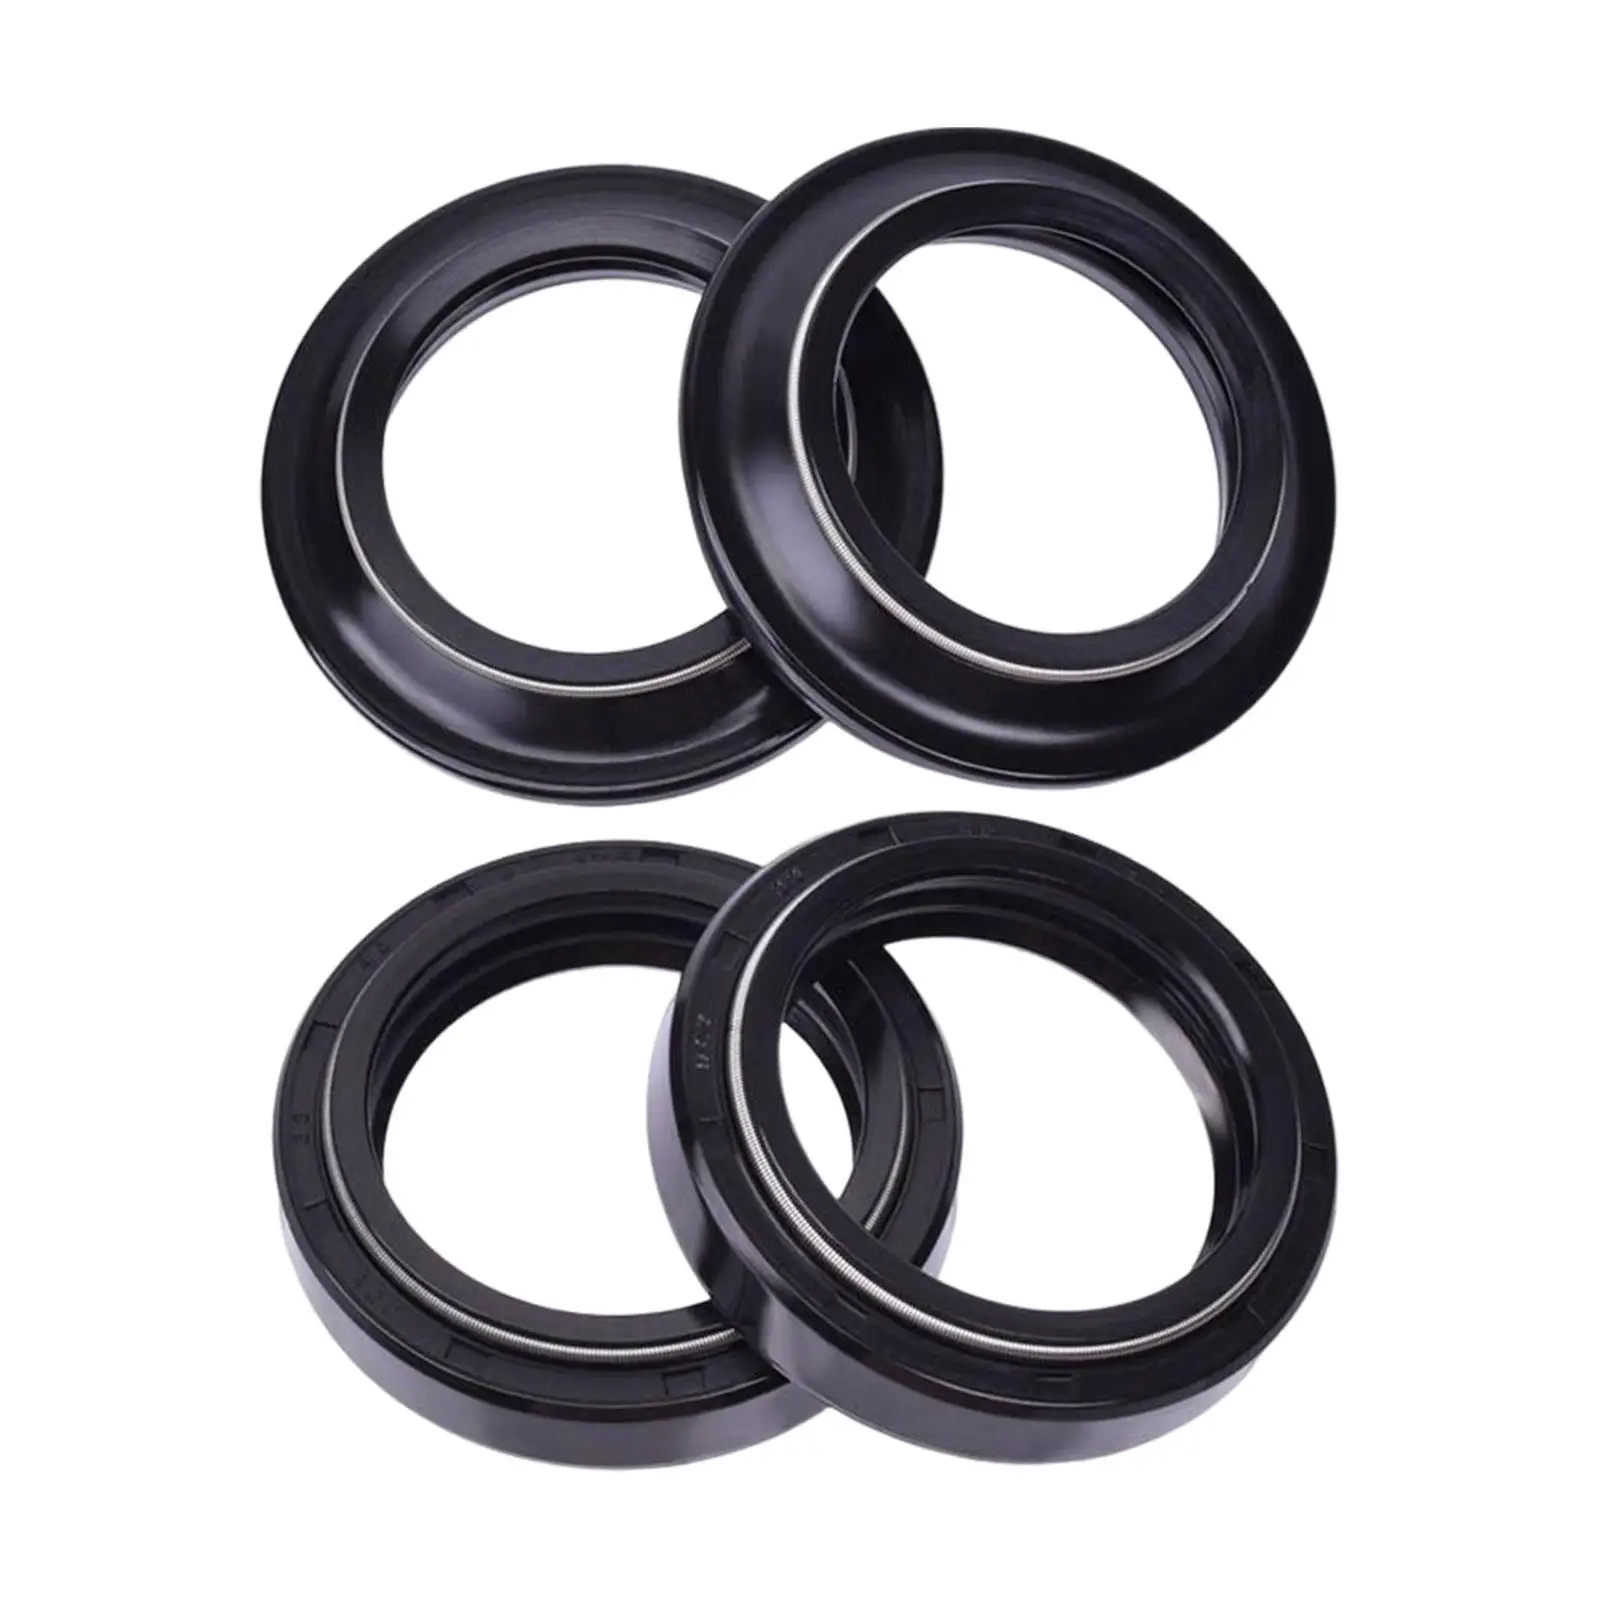 4 Pieces Motorcycle Front Fork Damper Shock Oil Seal & Dust Seal Shock Absorber for Yamaha TW200 SDR200 XV125 Virago XV250 images - 6